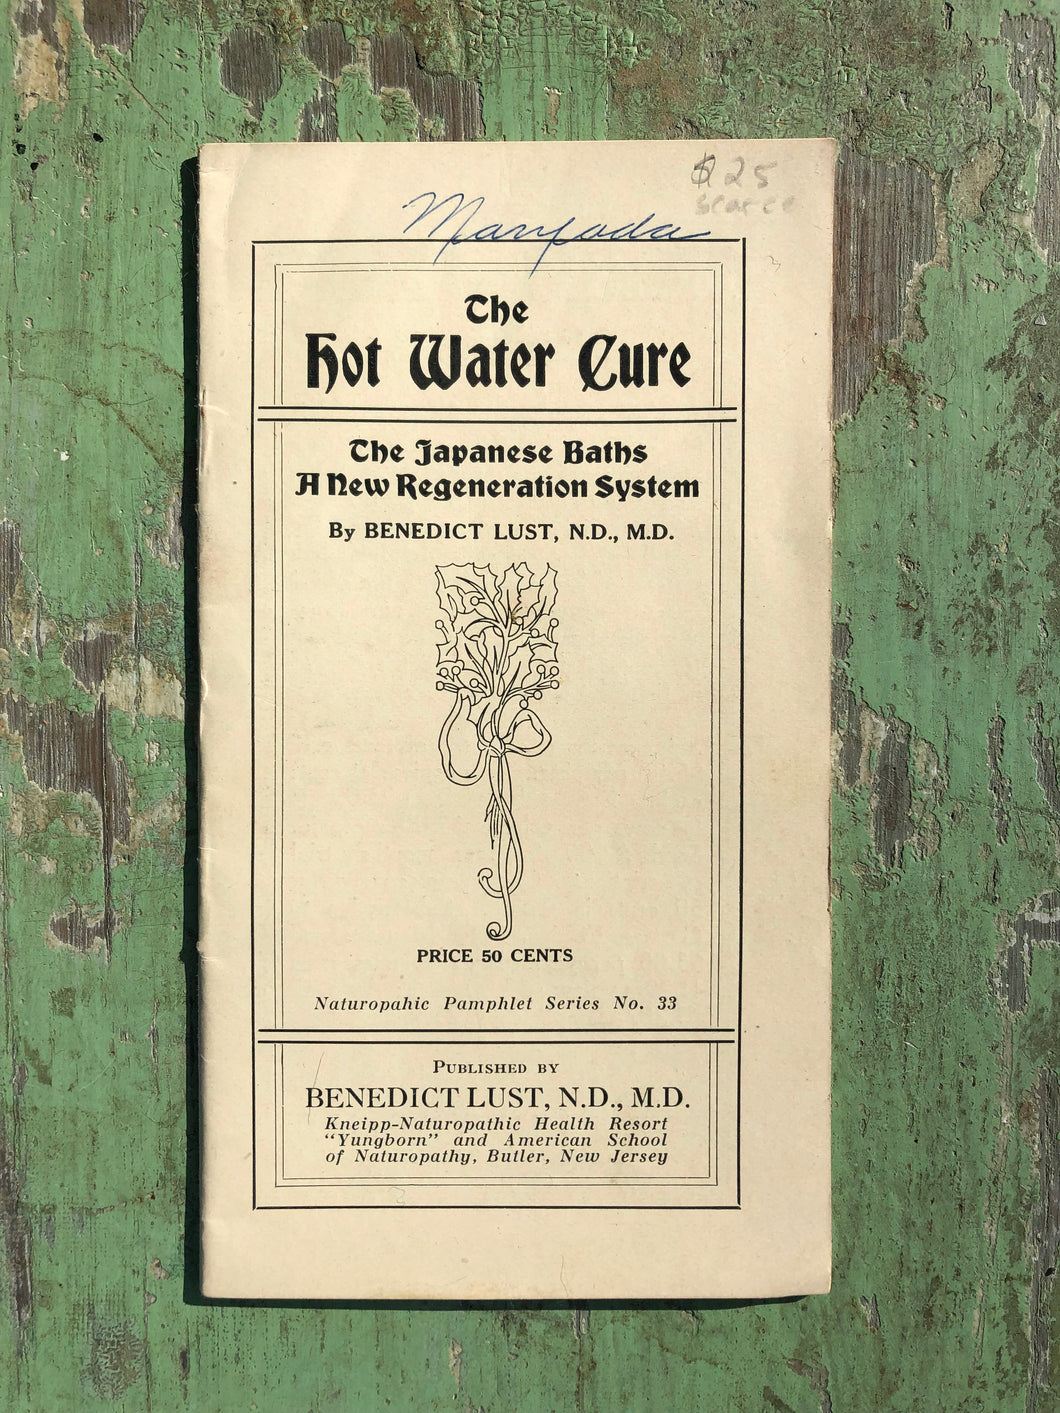 The Hot Water Cure: The Japanese Baths, A New Regeneration System by Benedict Lust. Naturopathic Pamphlet Series No. 33